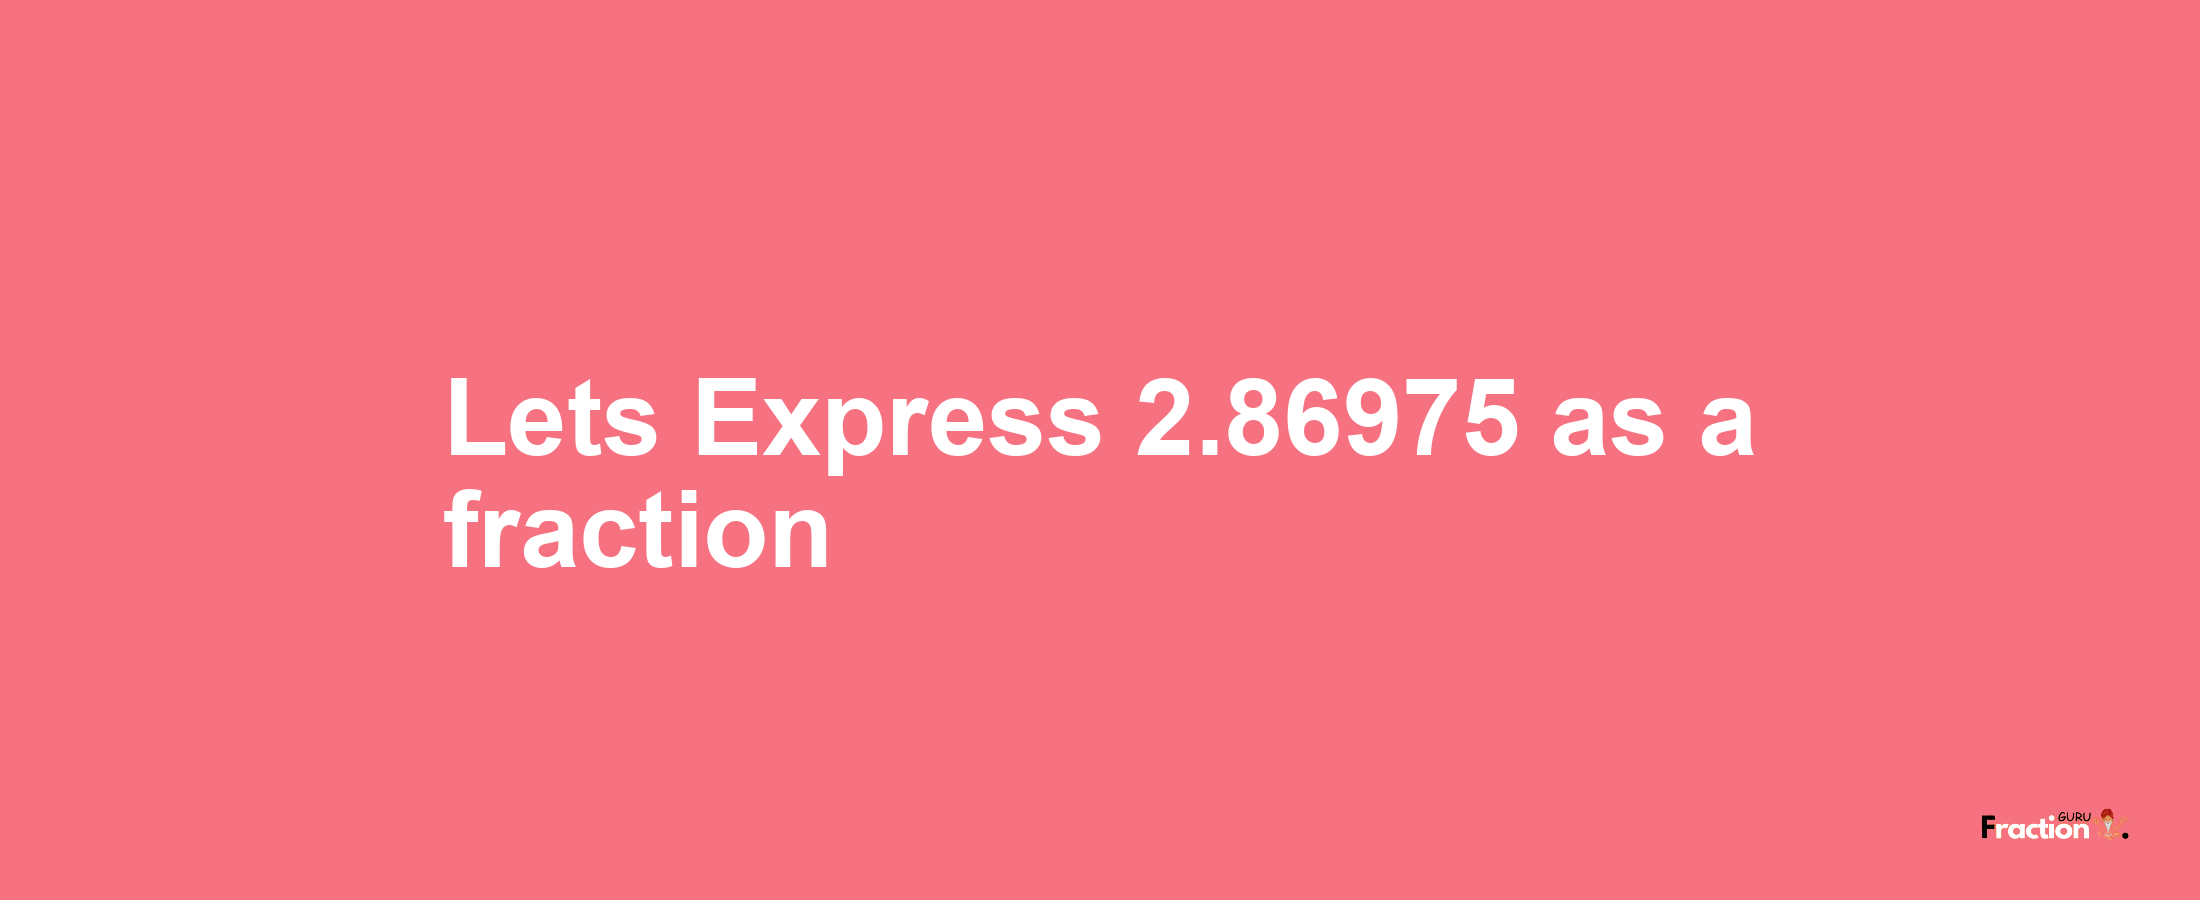 Lets Express 2.86975 as afraction